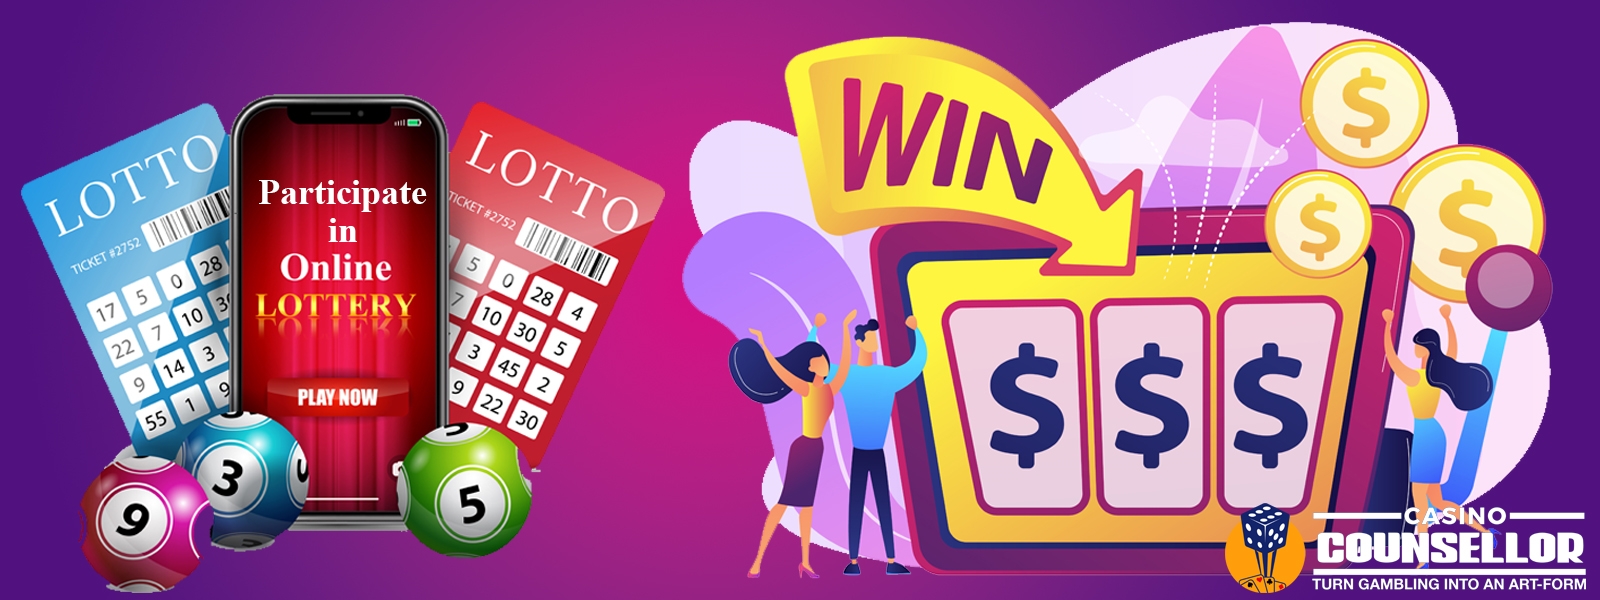 How to Participate in Online Lotteries, Win Big Prizes, 5 Steps, Increase Chances, Join the Excitement